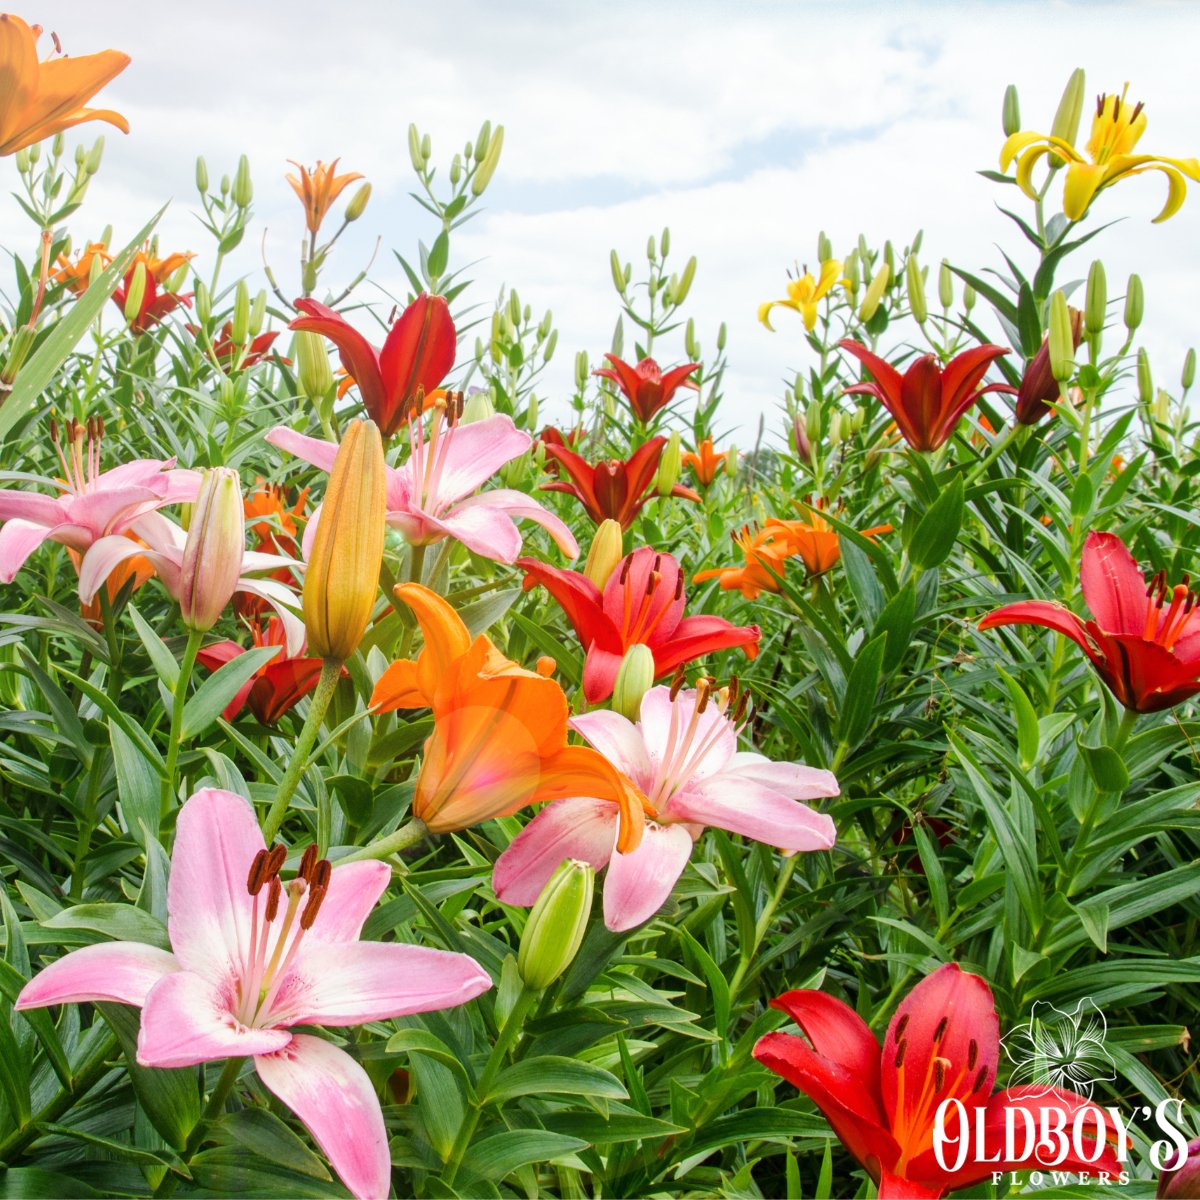 Liliums Care Guide: Tips, Tricks and Techniques for Growing your Best Blooms - Oldboy's Flowers